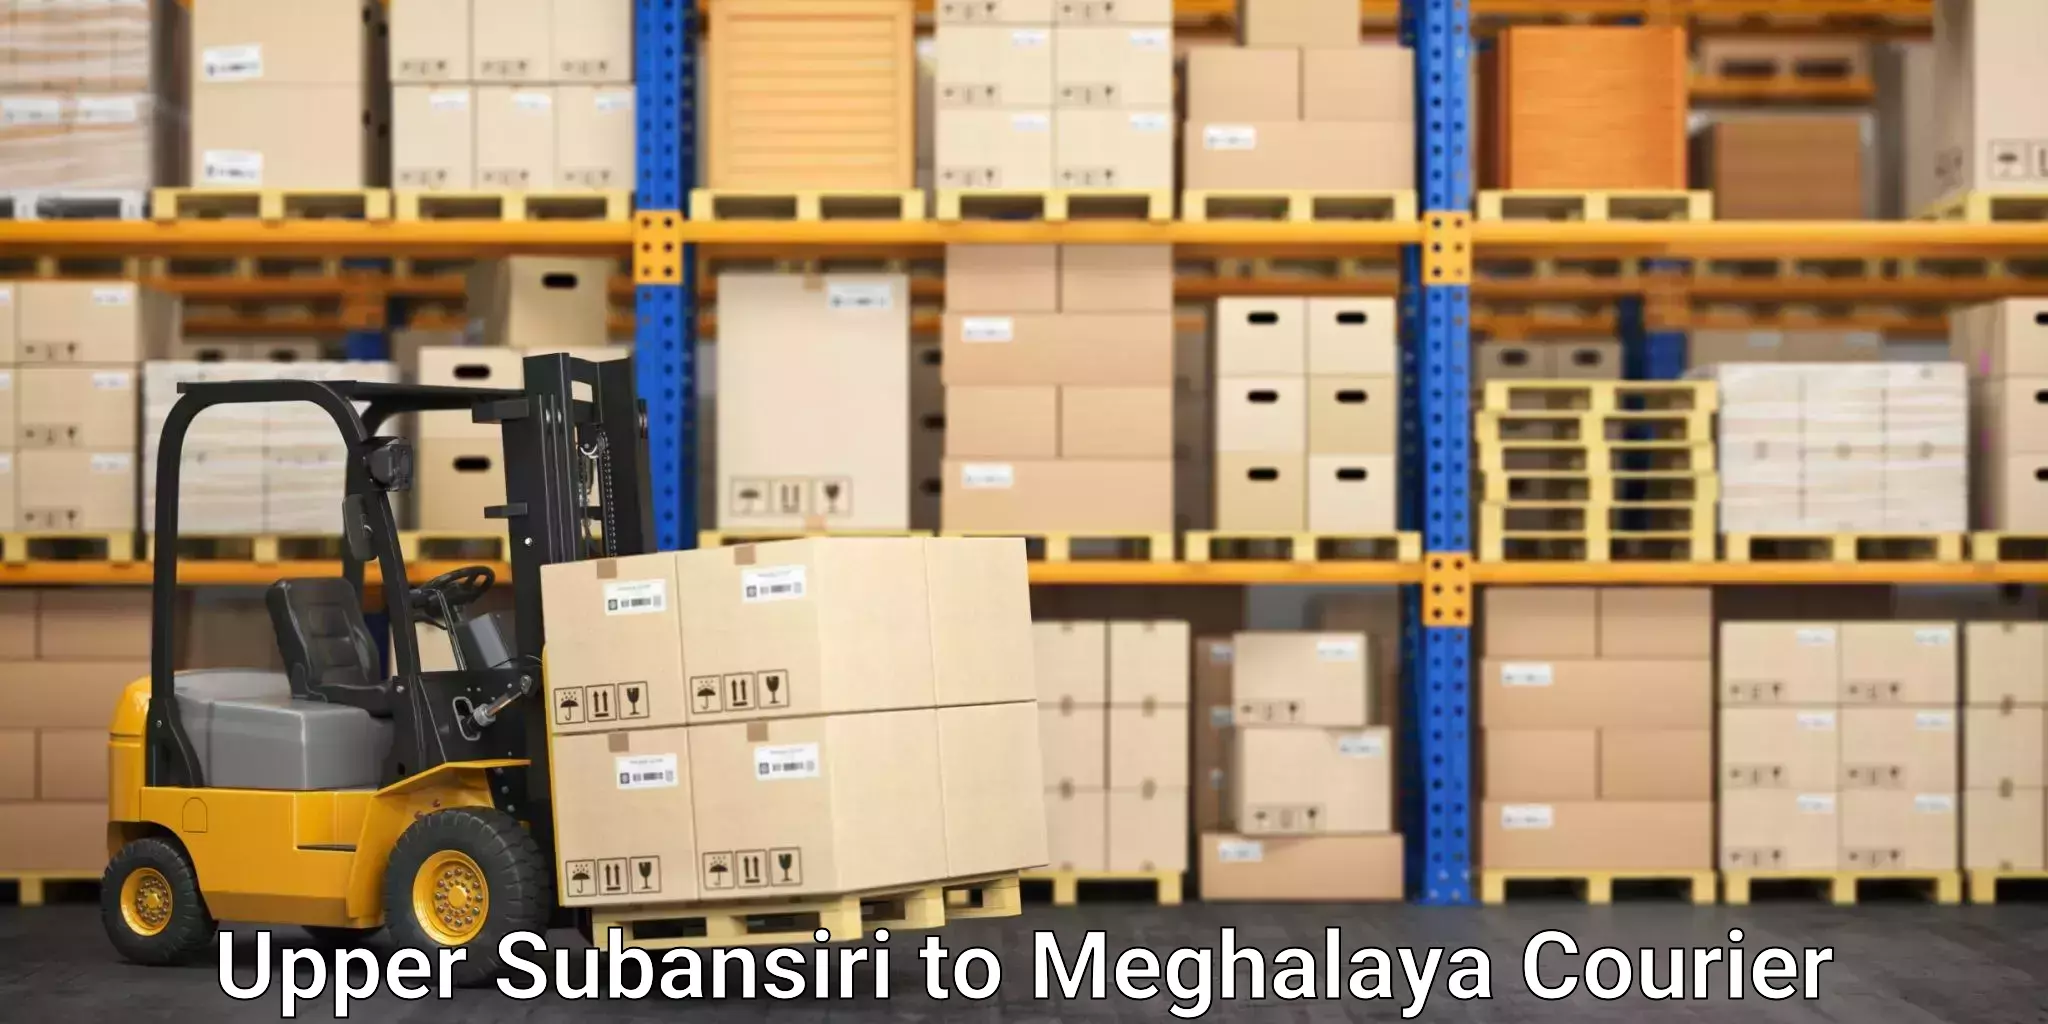 Nationwide shipping capabilities in Upper Subansiri to Khliehriat